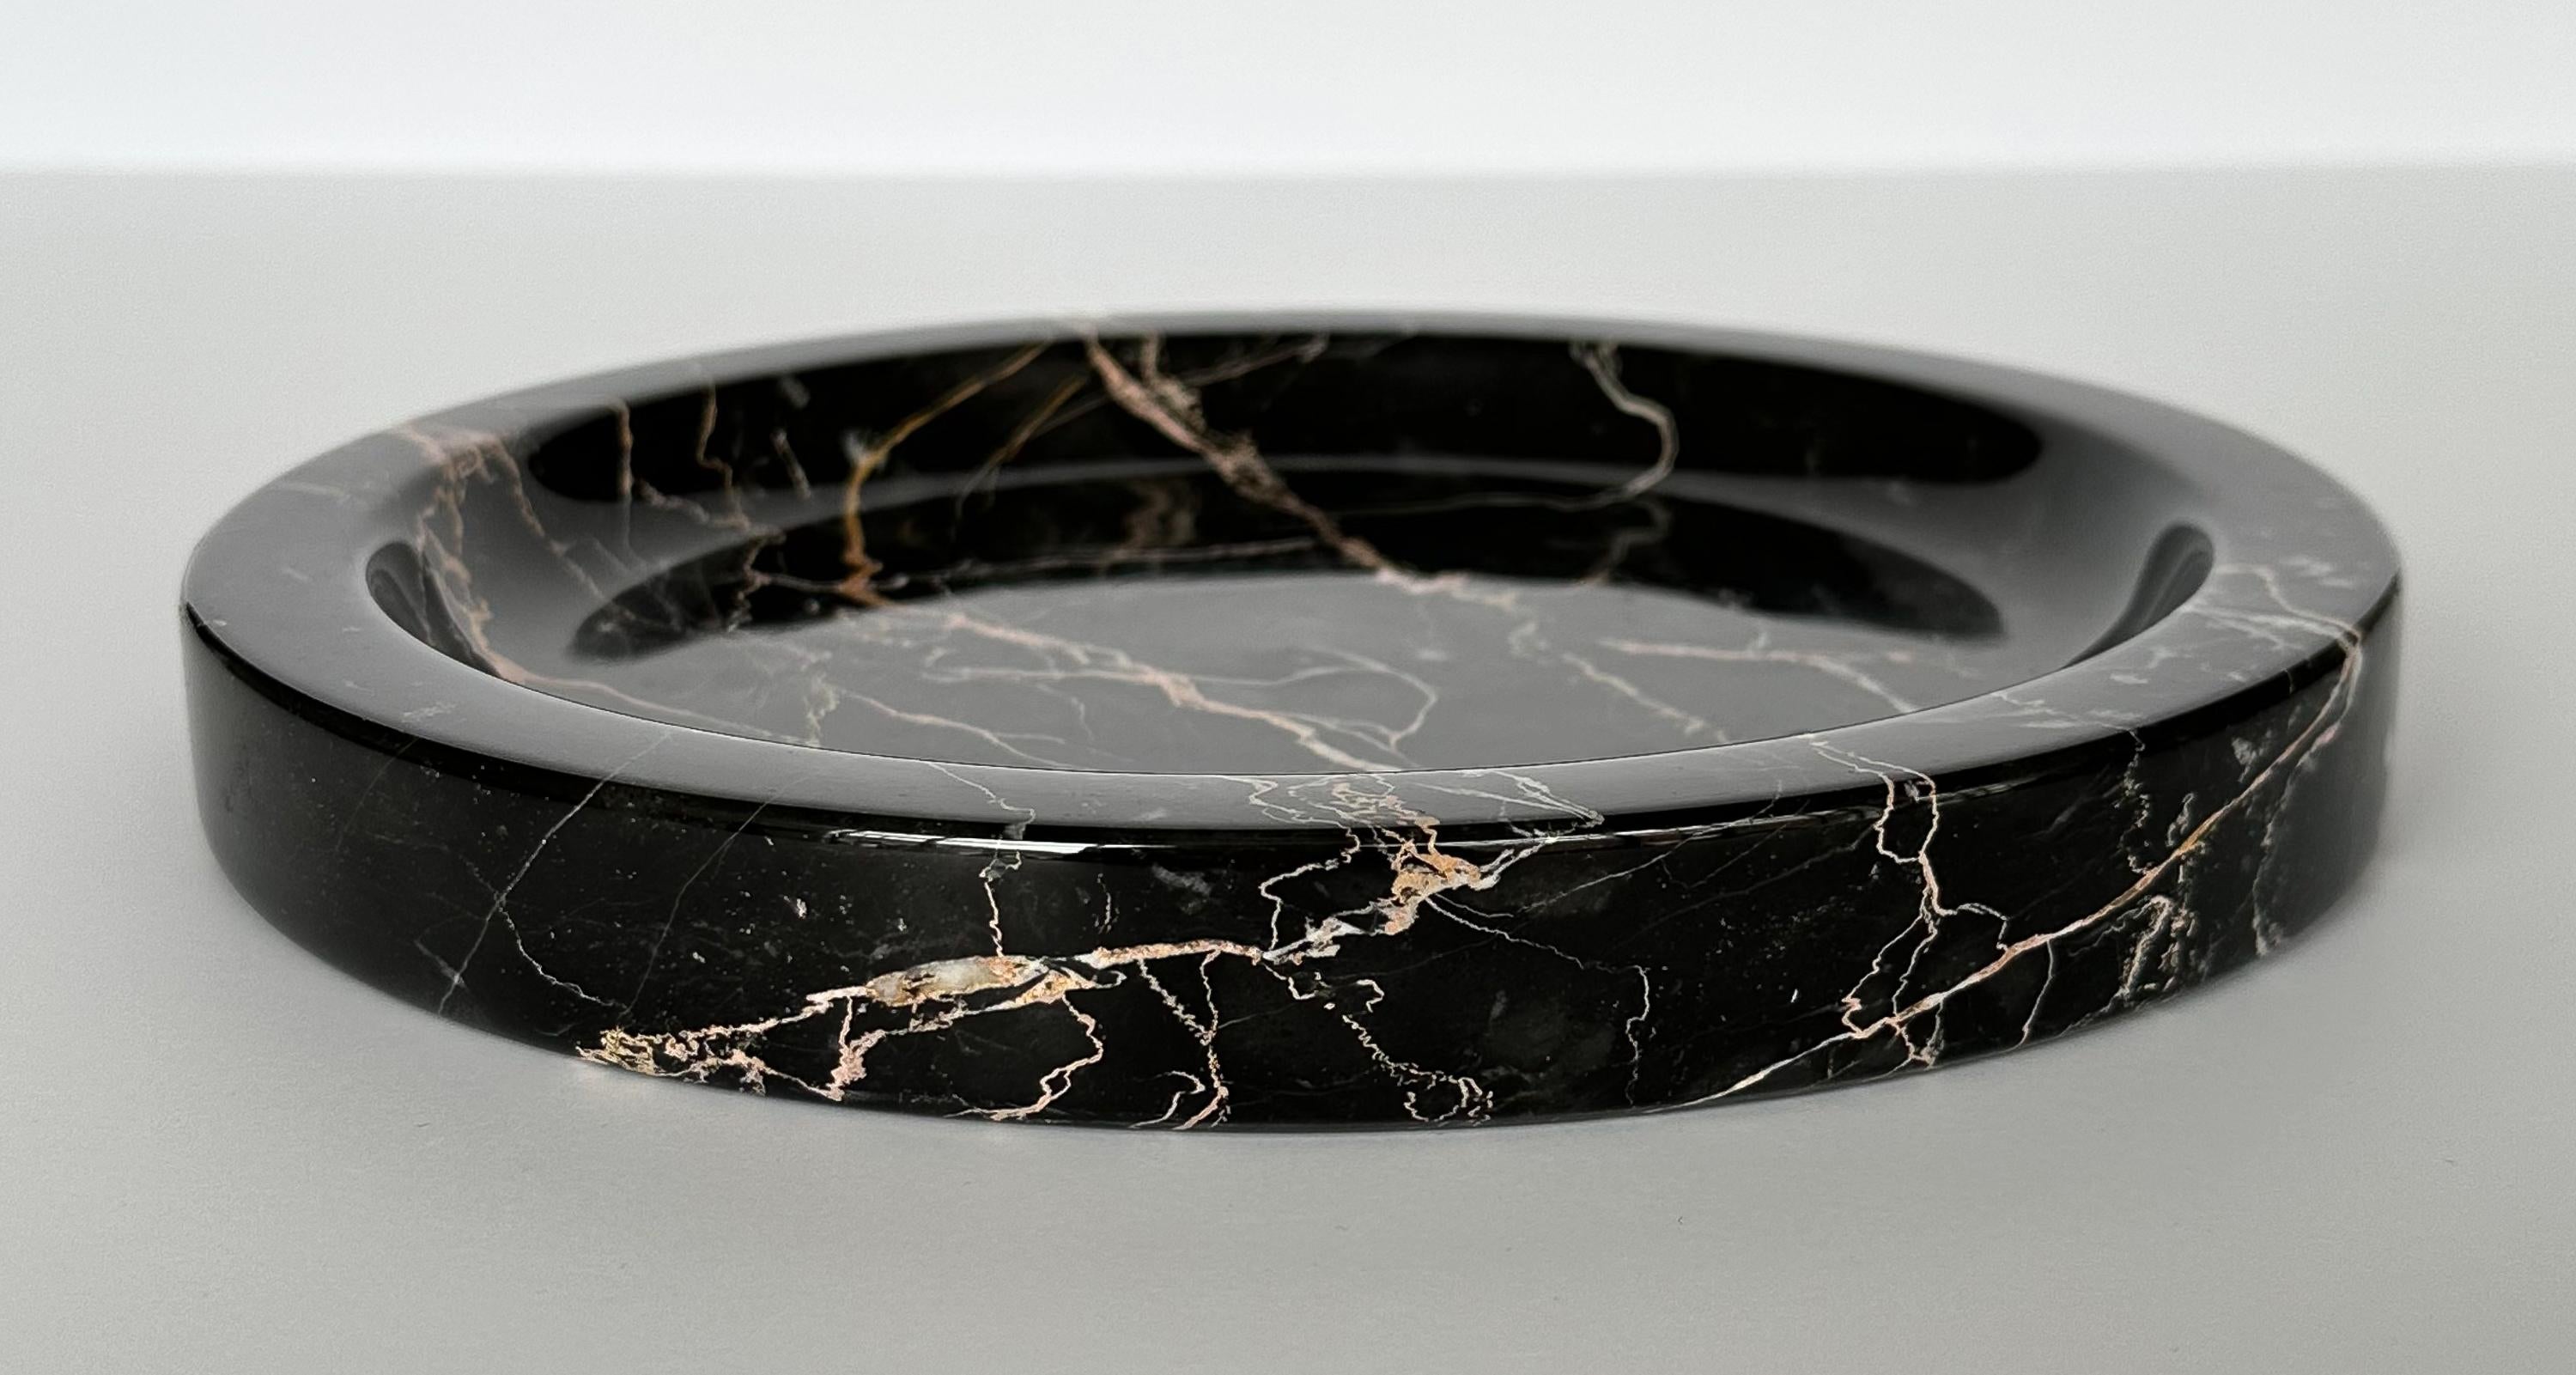 Black marble modern low bowl / vide poche by Oggetti, Italy circa 1970s. Solid carved Nero Portoro marble (black marble with white and tan veining). Retains the original Oggetti labels. Measures: 9.75